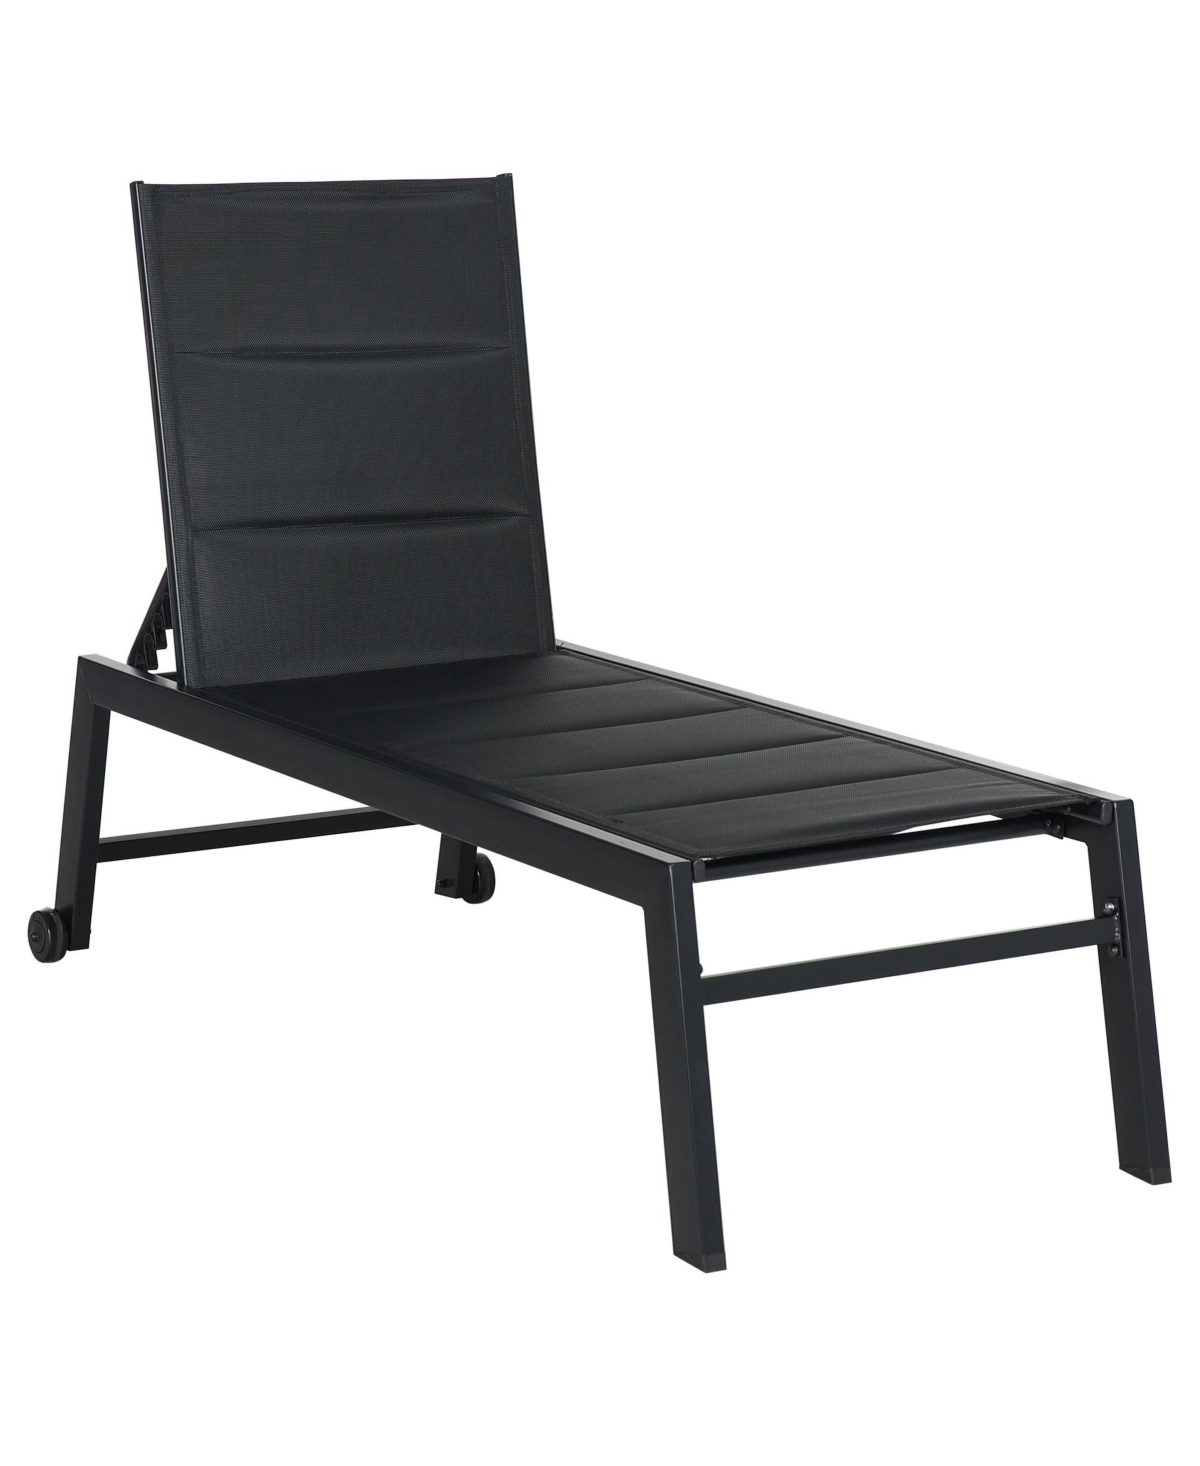 Outsunny Outdoor Chaise Lounge Chair, Pool & Sun Tanning Chair With Five-position Reclining Back, Wheels, Thi In Black